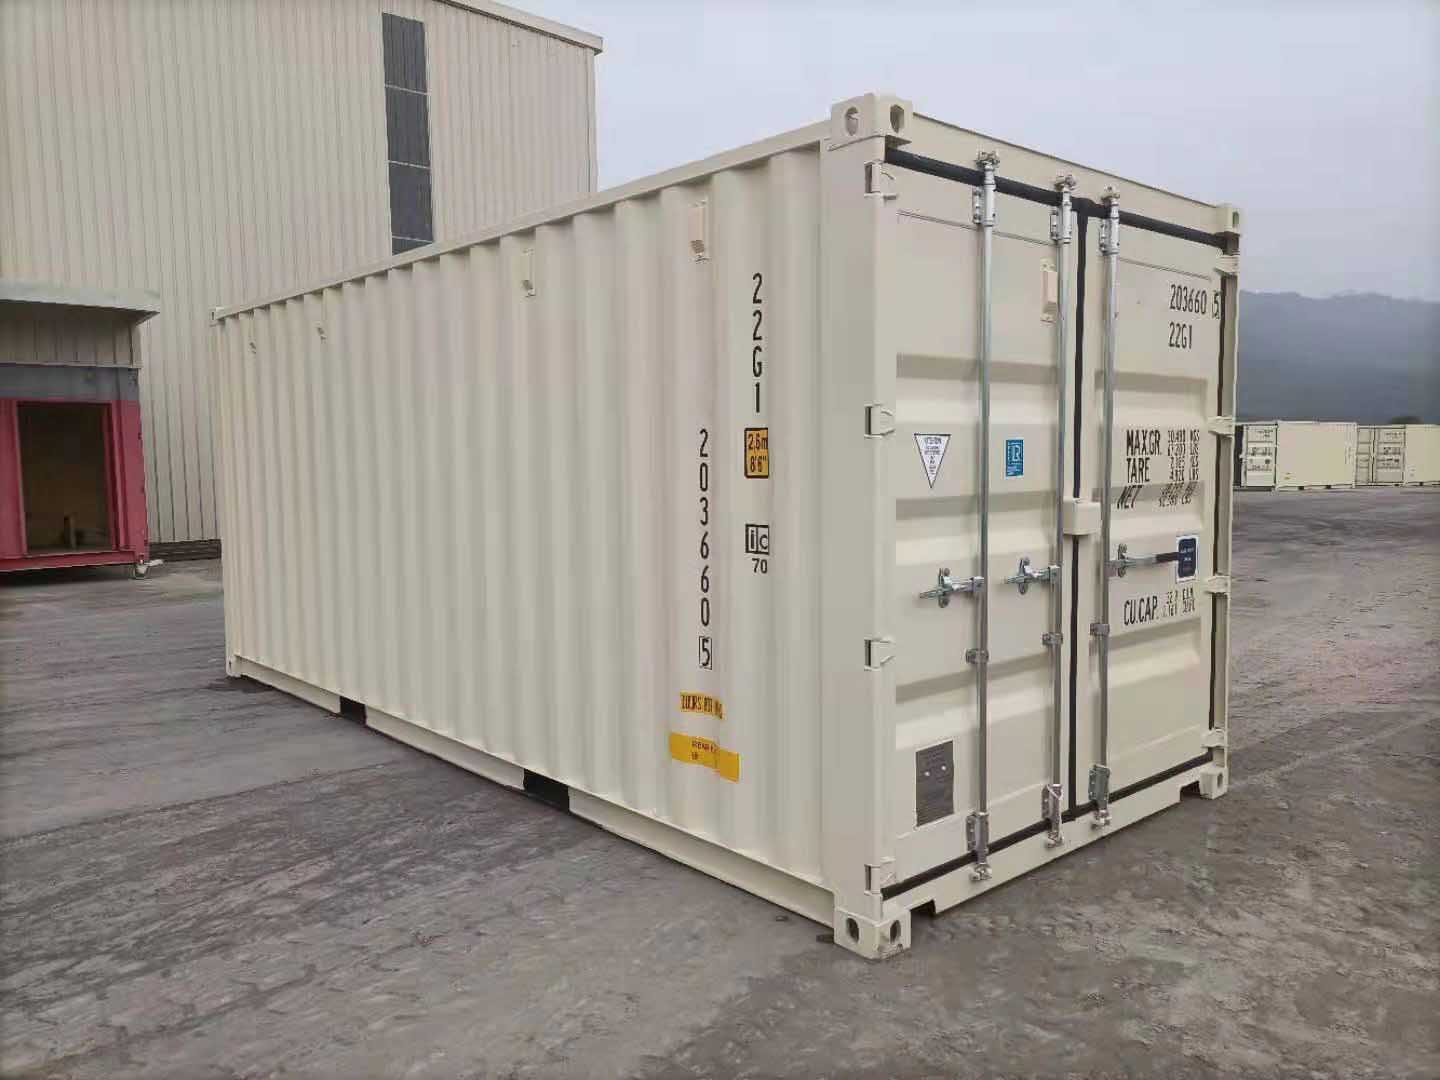 Shipping containers for sale in Eau Claire